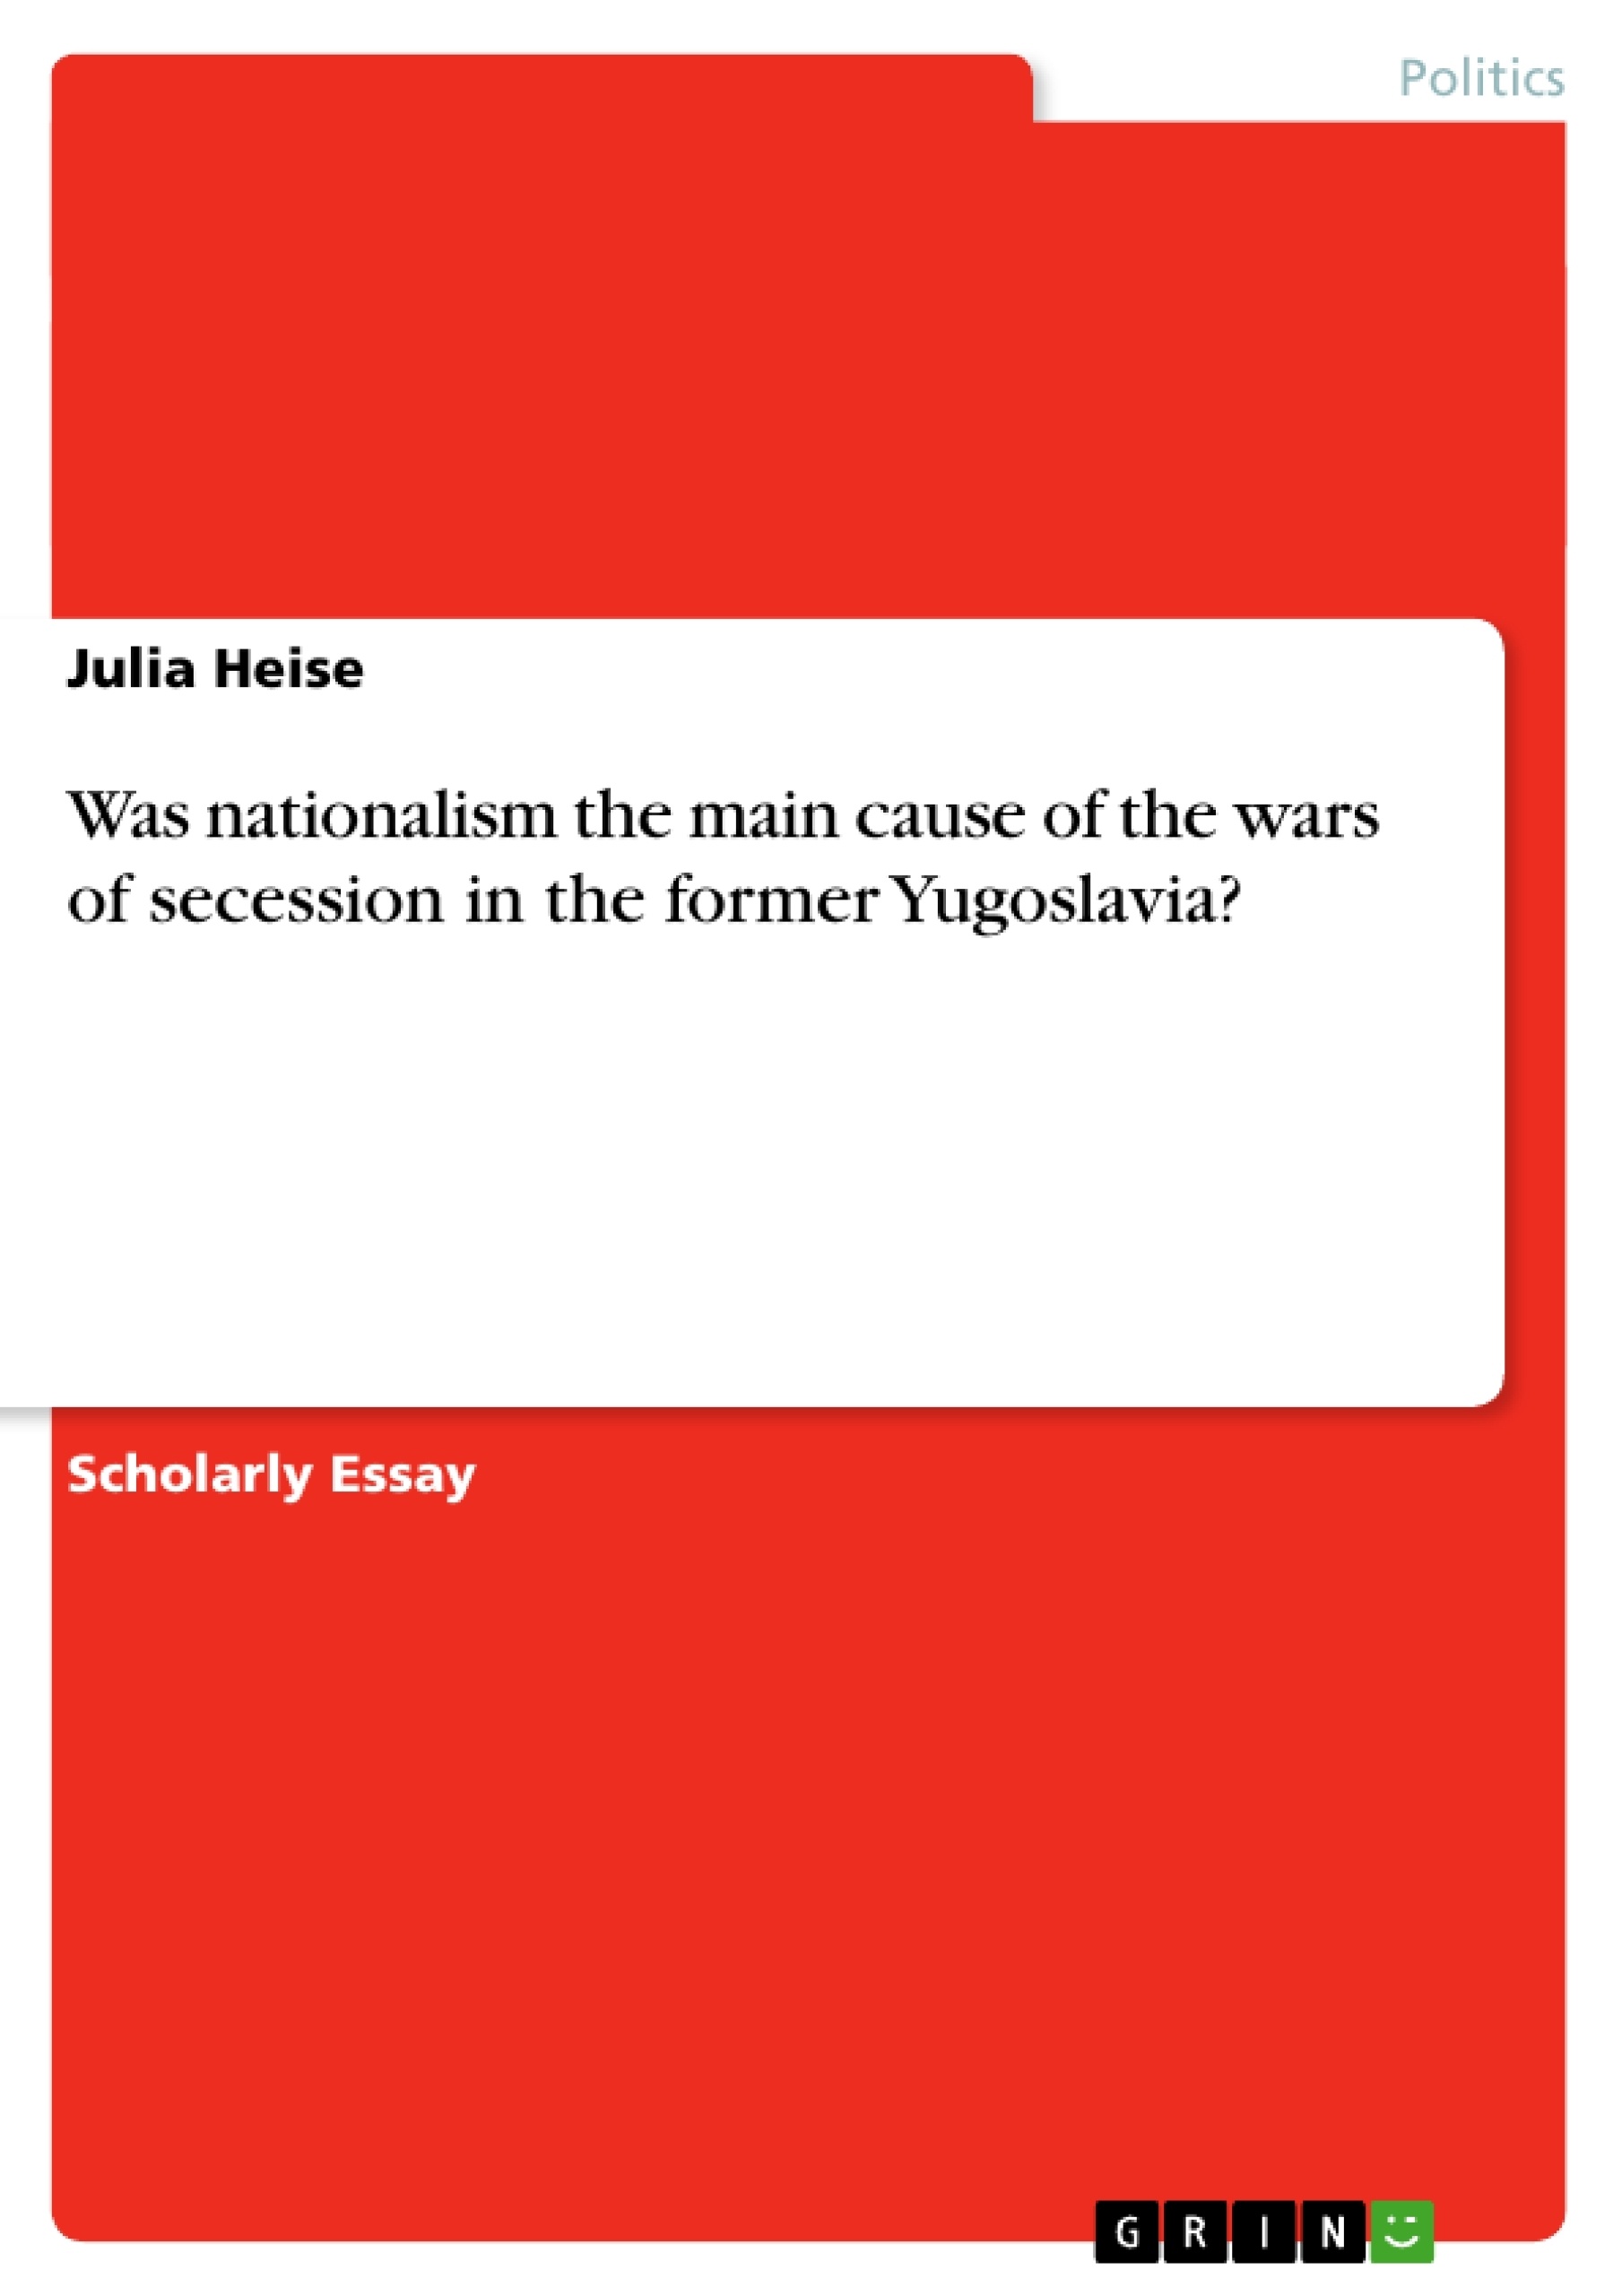 Titre: Was nationalism the main cause of the wars of secession in the former Yugoslavia?